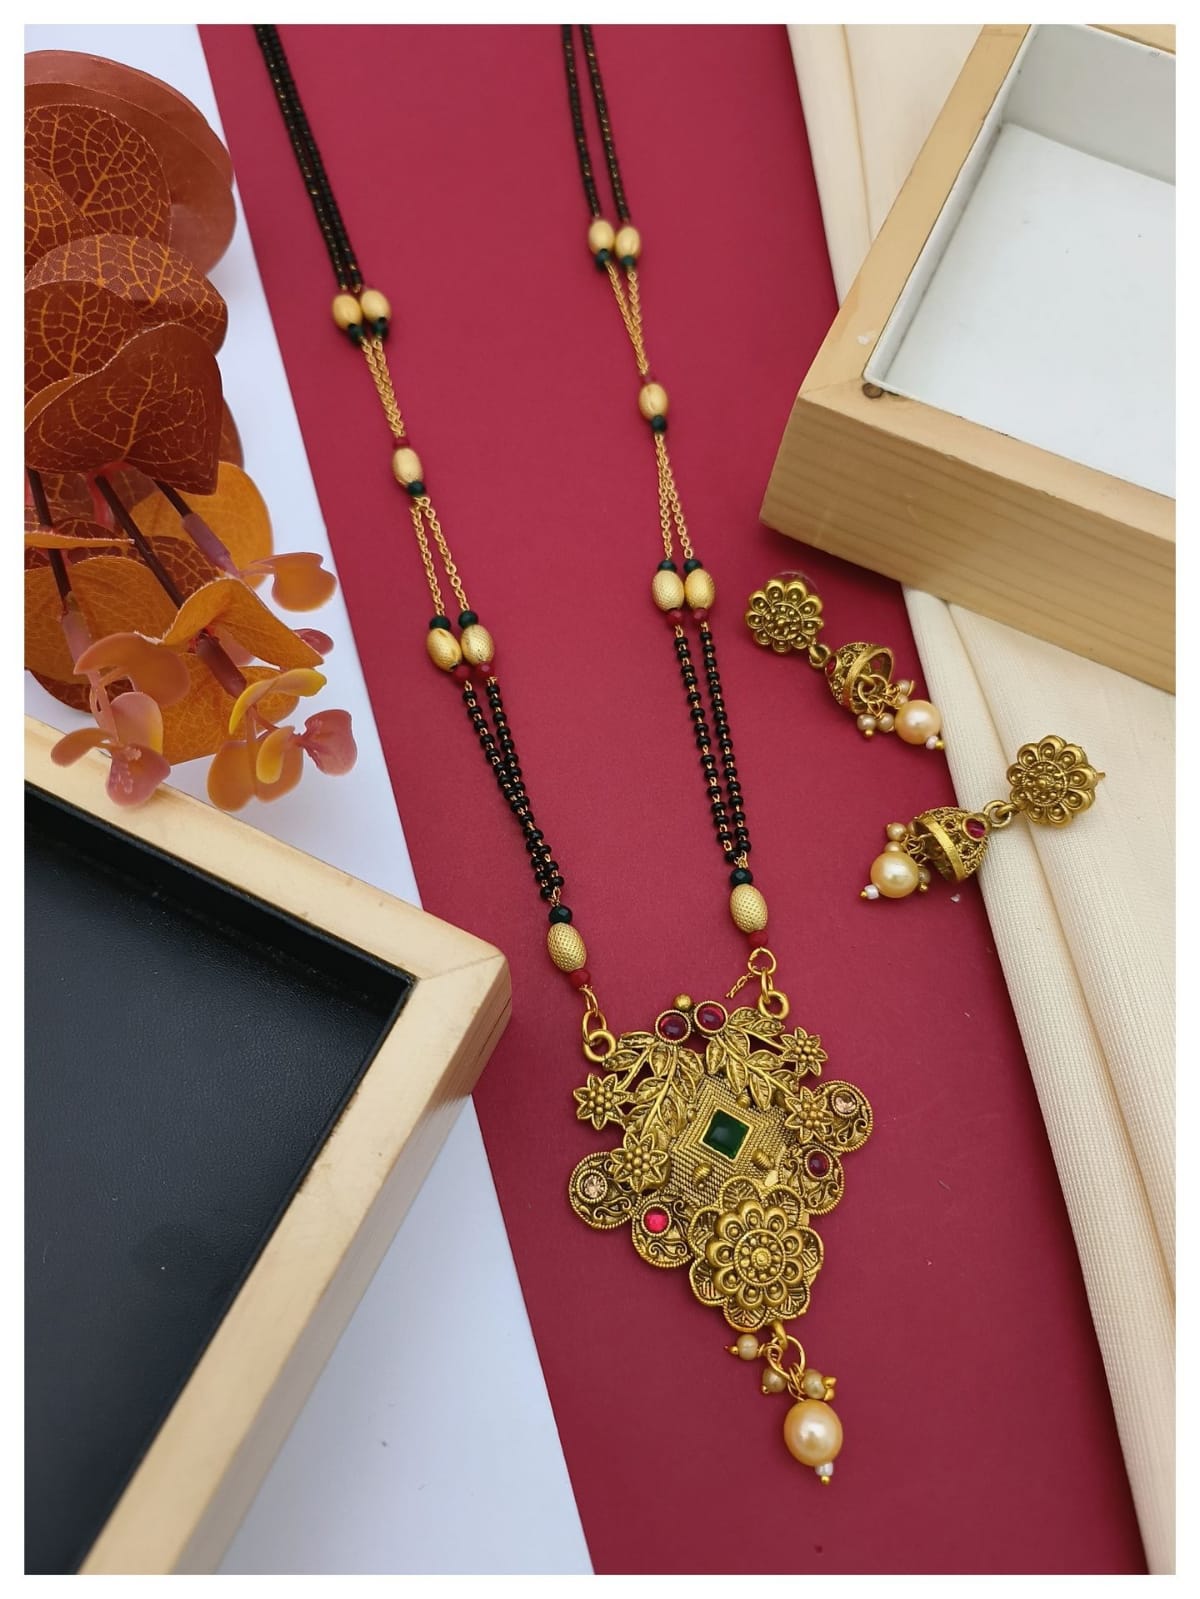 Peora Matte Gold Finish Peacock Design Mangalsutra with Earrings Traditional Jewellery for Women